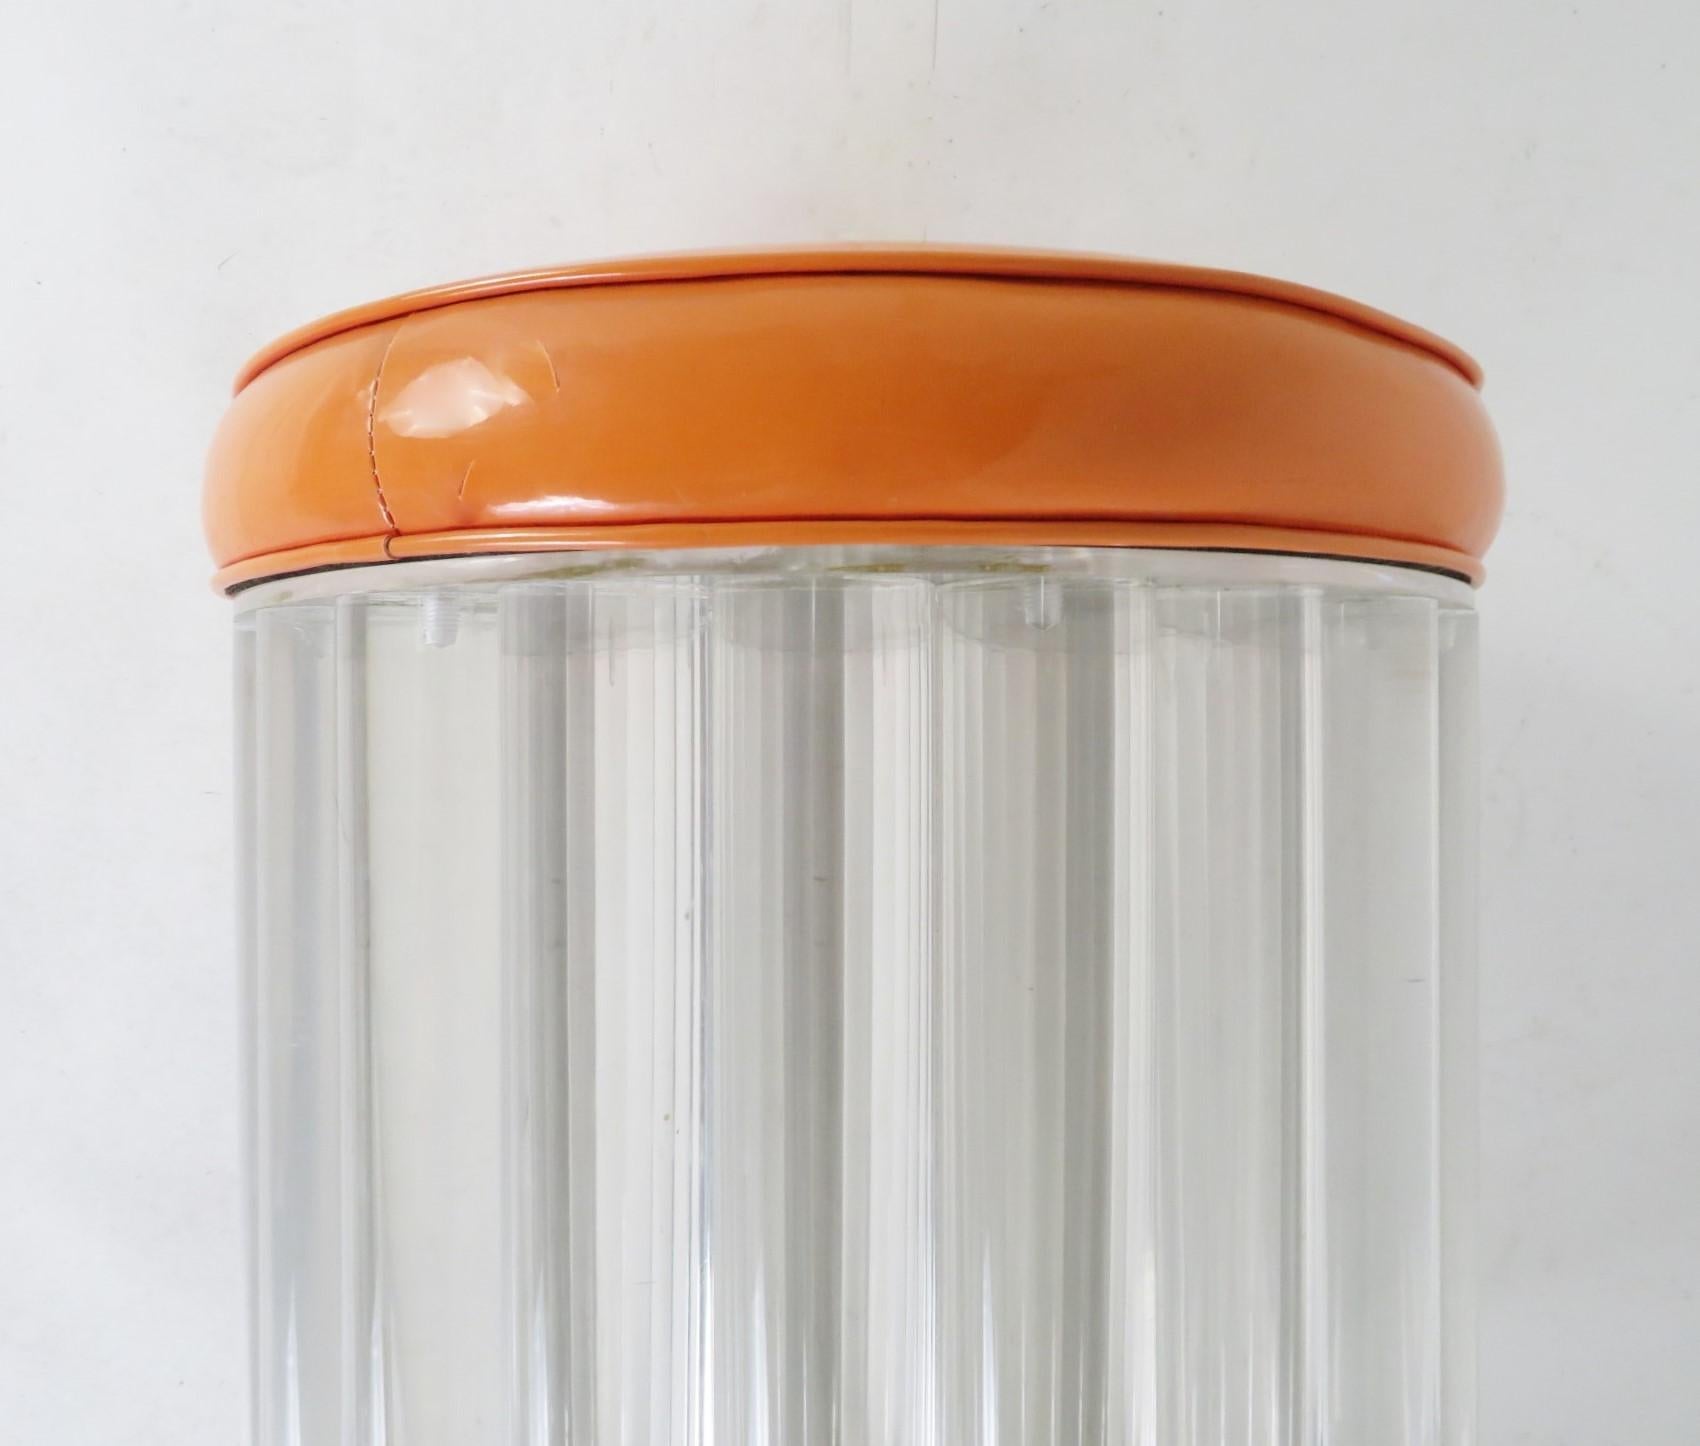 Acrylic Posh Hollywood Ottoman, Solid Lucite Rods in the Style of Hollis Jones or Draper